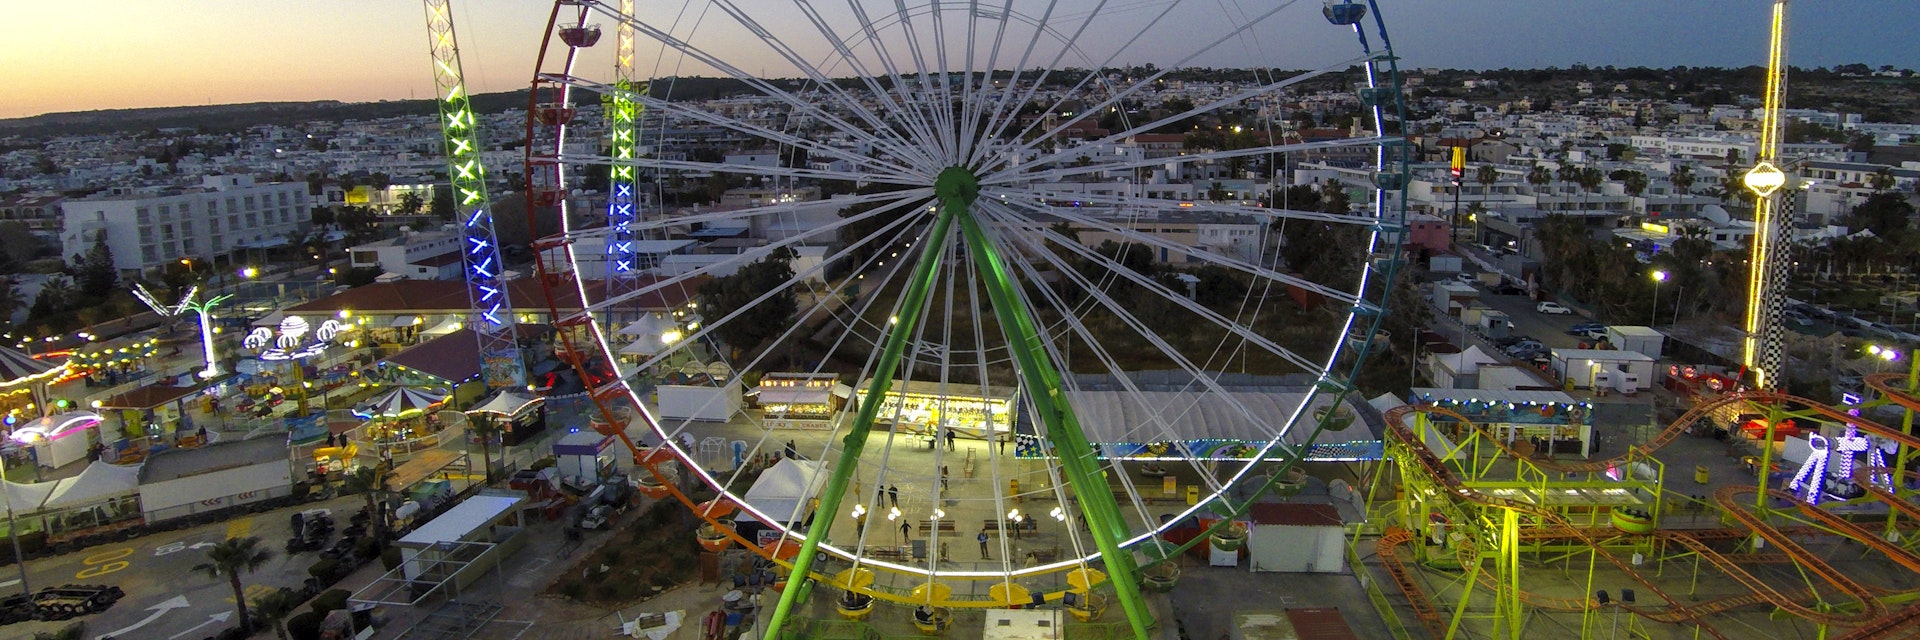 LARNACA, CYPRUS - APRIL 12: Aerial view of Parko Paliatso Luna park on April 12, 2015 in Larnaca, Cyprus.Parko Paliatso Luna park is a family owned funfair in the heart of Ayia Napa, on Nissi Avenue. It opened in 1999 and today covers an area of 25,000 square metres with more than 25 attractions. For smaller children there is a large indoor play area and plenty of rides to enjoy, such as bumper boats, tea-cups, trampolines and carousels. (Photo by Athanasios Gioumpasis/Getty Images)